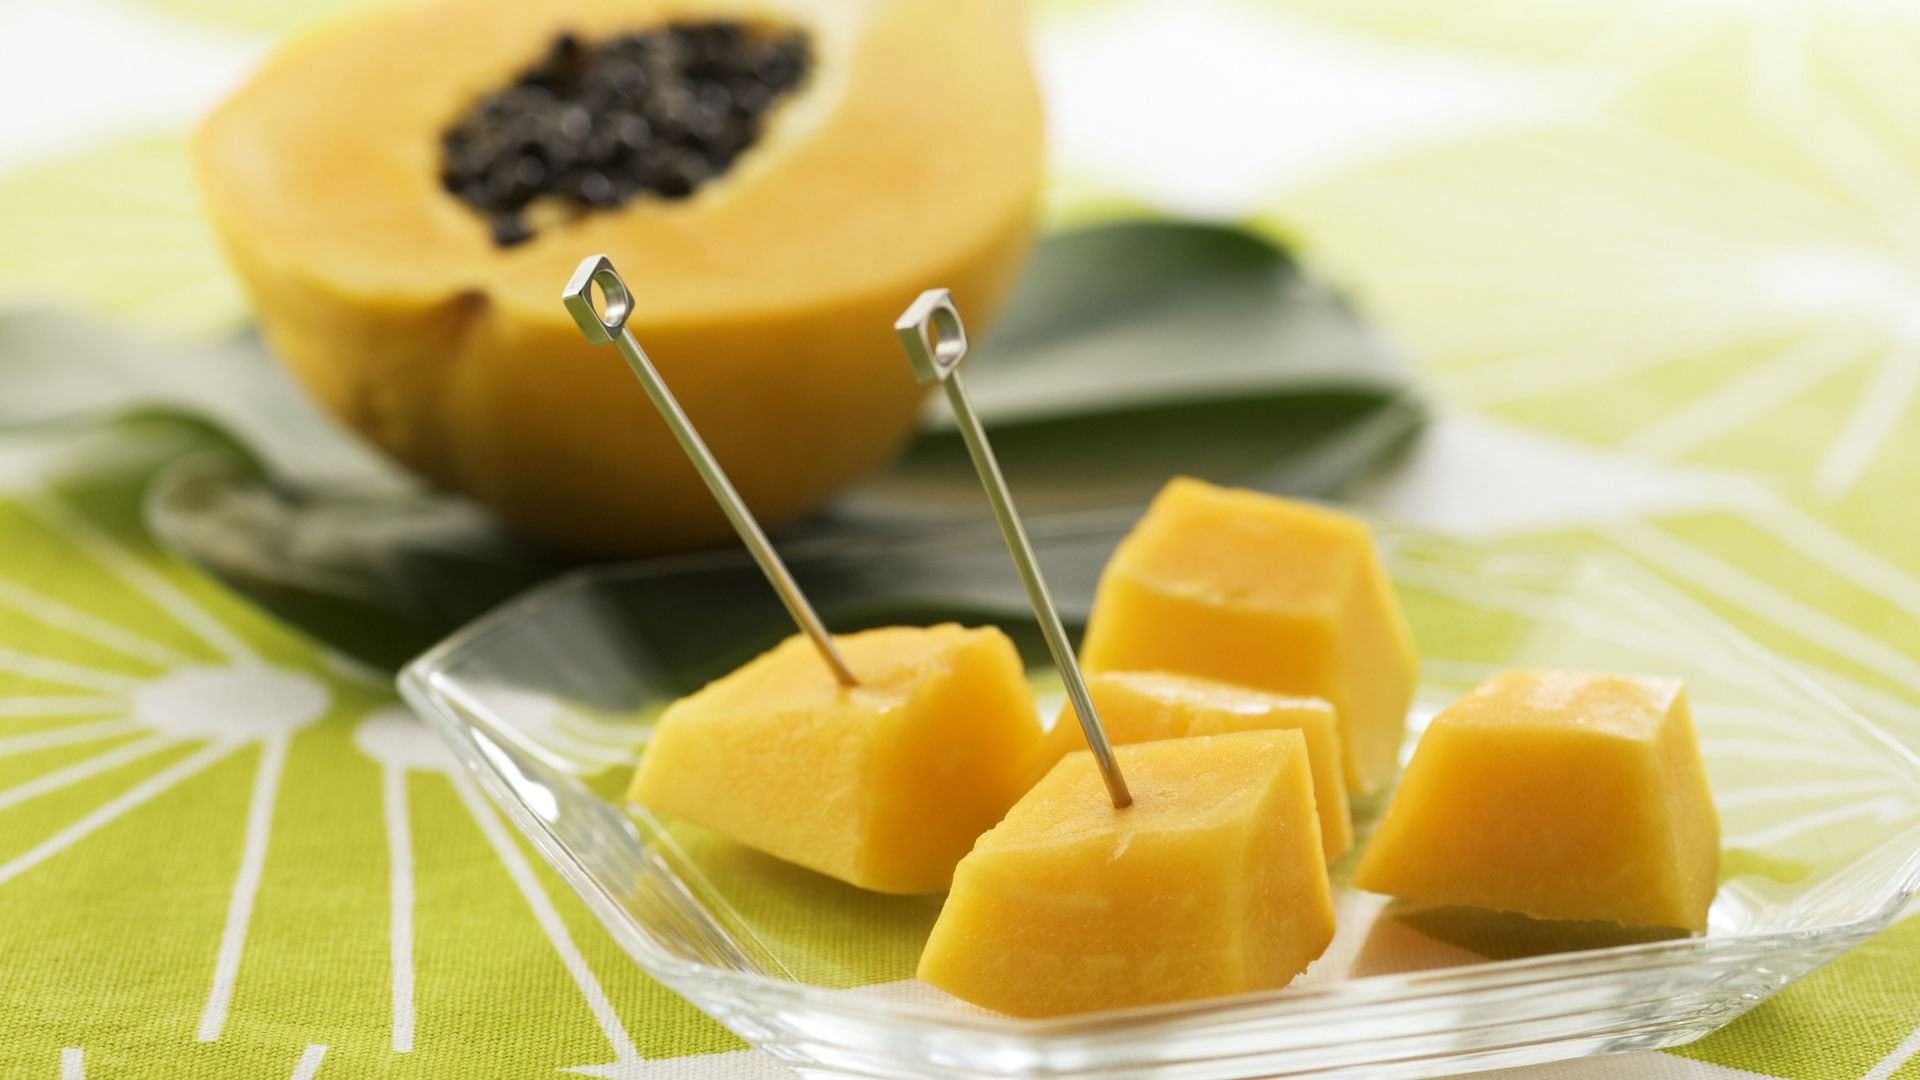 papaya slices, swords, fruit, yellow, food, healthy eating, food and drink